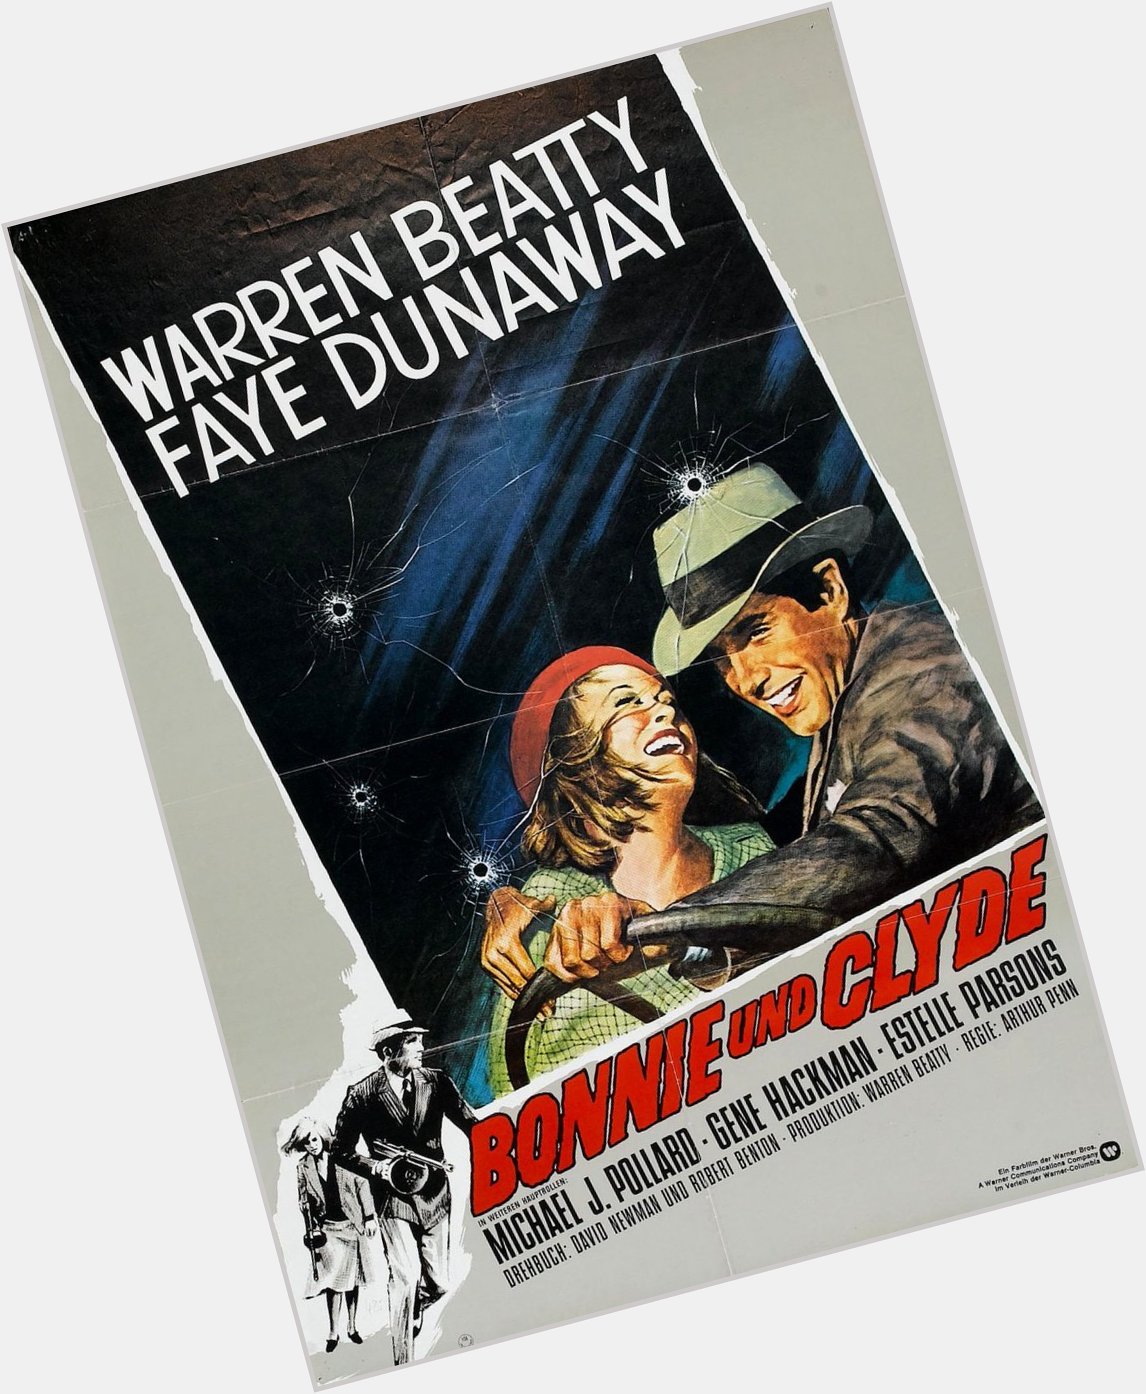 Happy Birthday Warren Beatty! -BONNIE AND CLYDE - 1967 - German release poster 